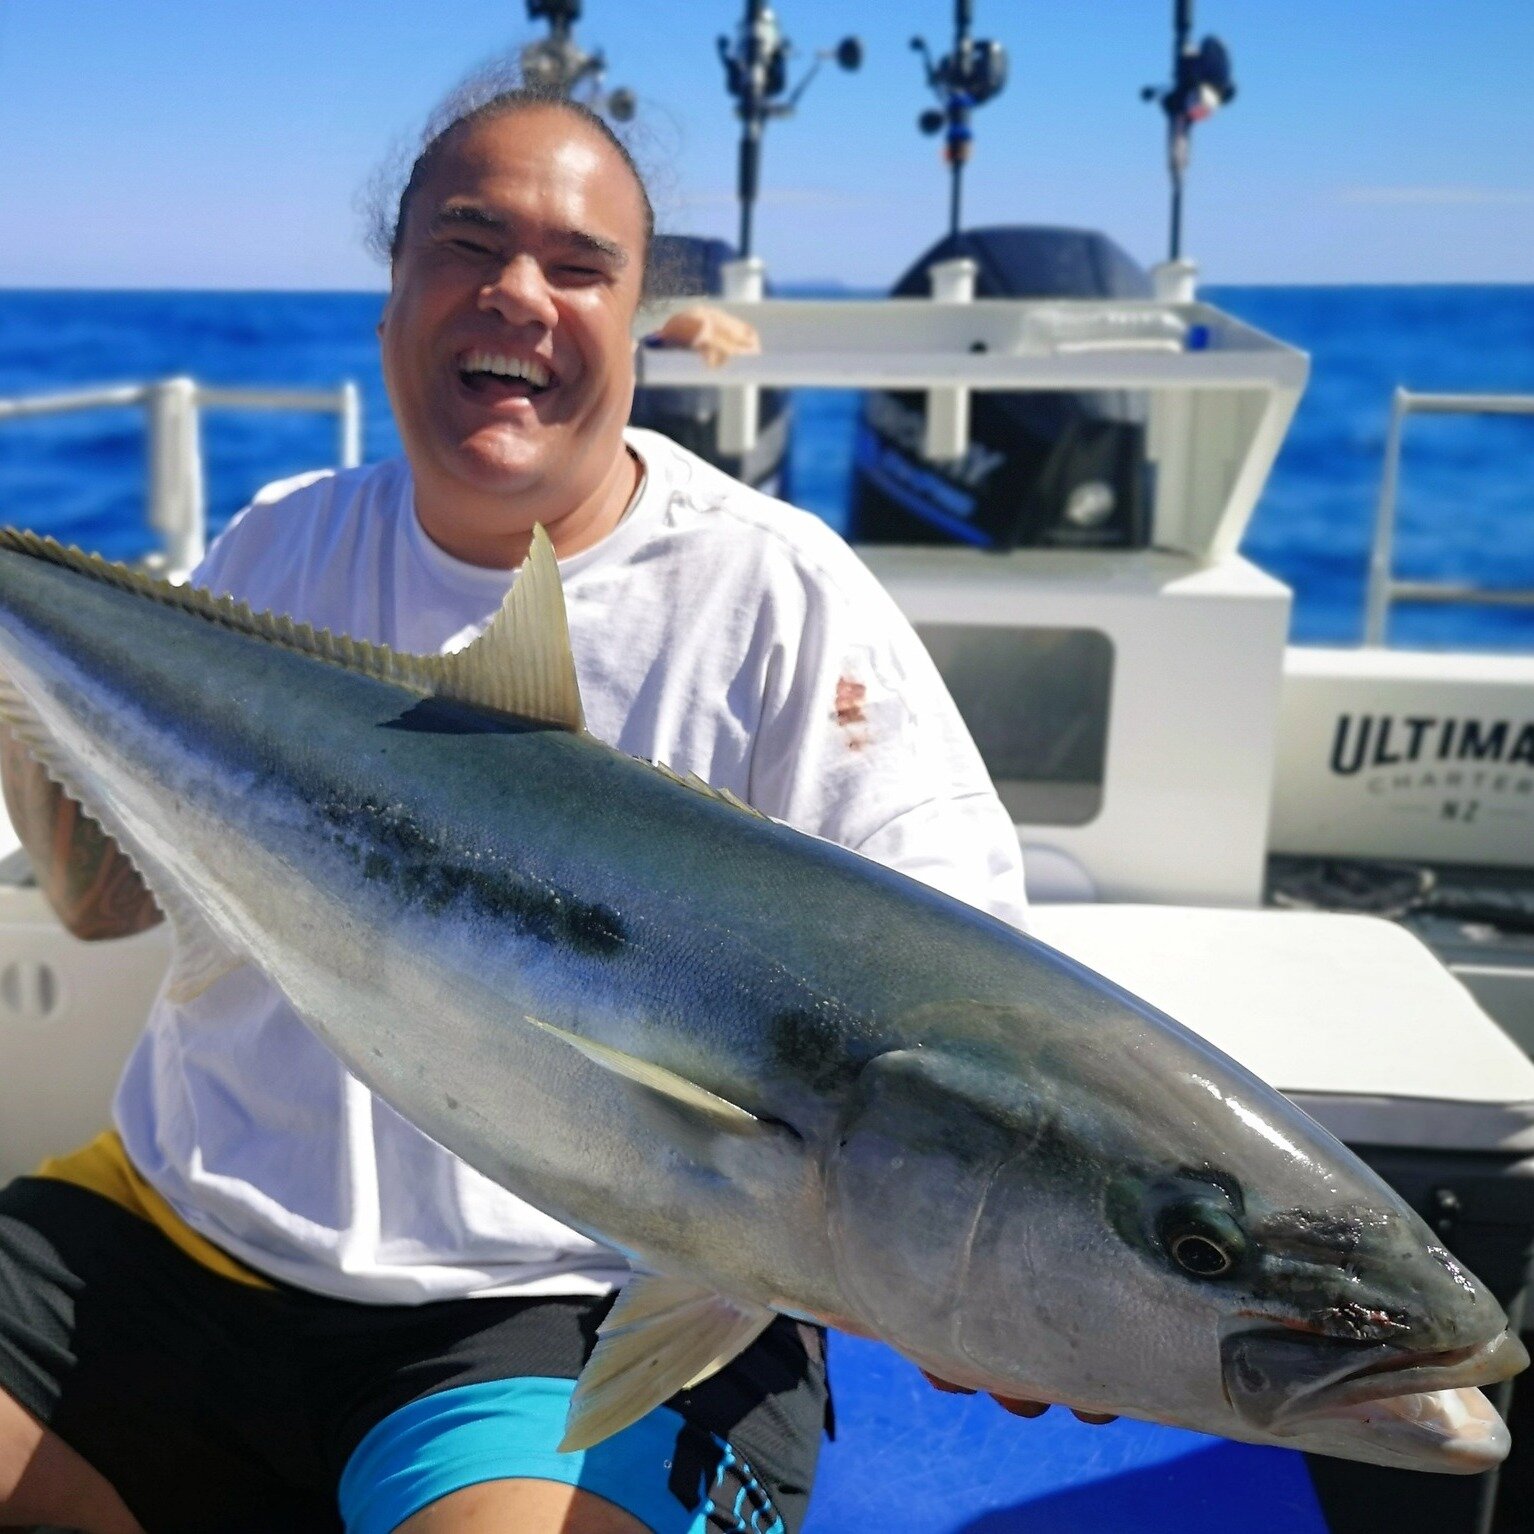 Hard to beat a long weekend on Aotea Great Barrier Island with our best mates from Promains Limited and some of their rad clients. Quality time with a quality crew, happy days🎣🌞💥

Email bookings@ultimatecharters.co.nz to find out about booking a m